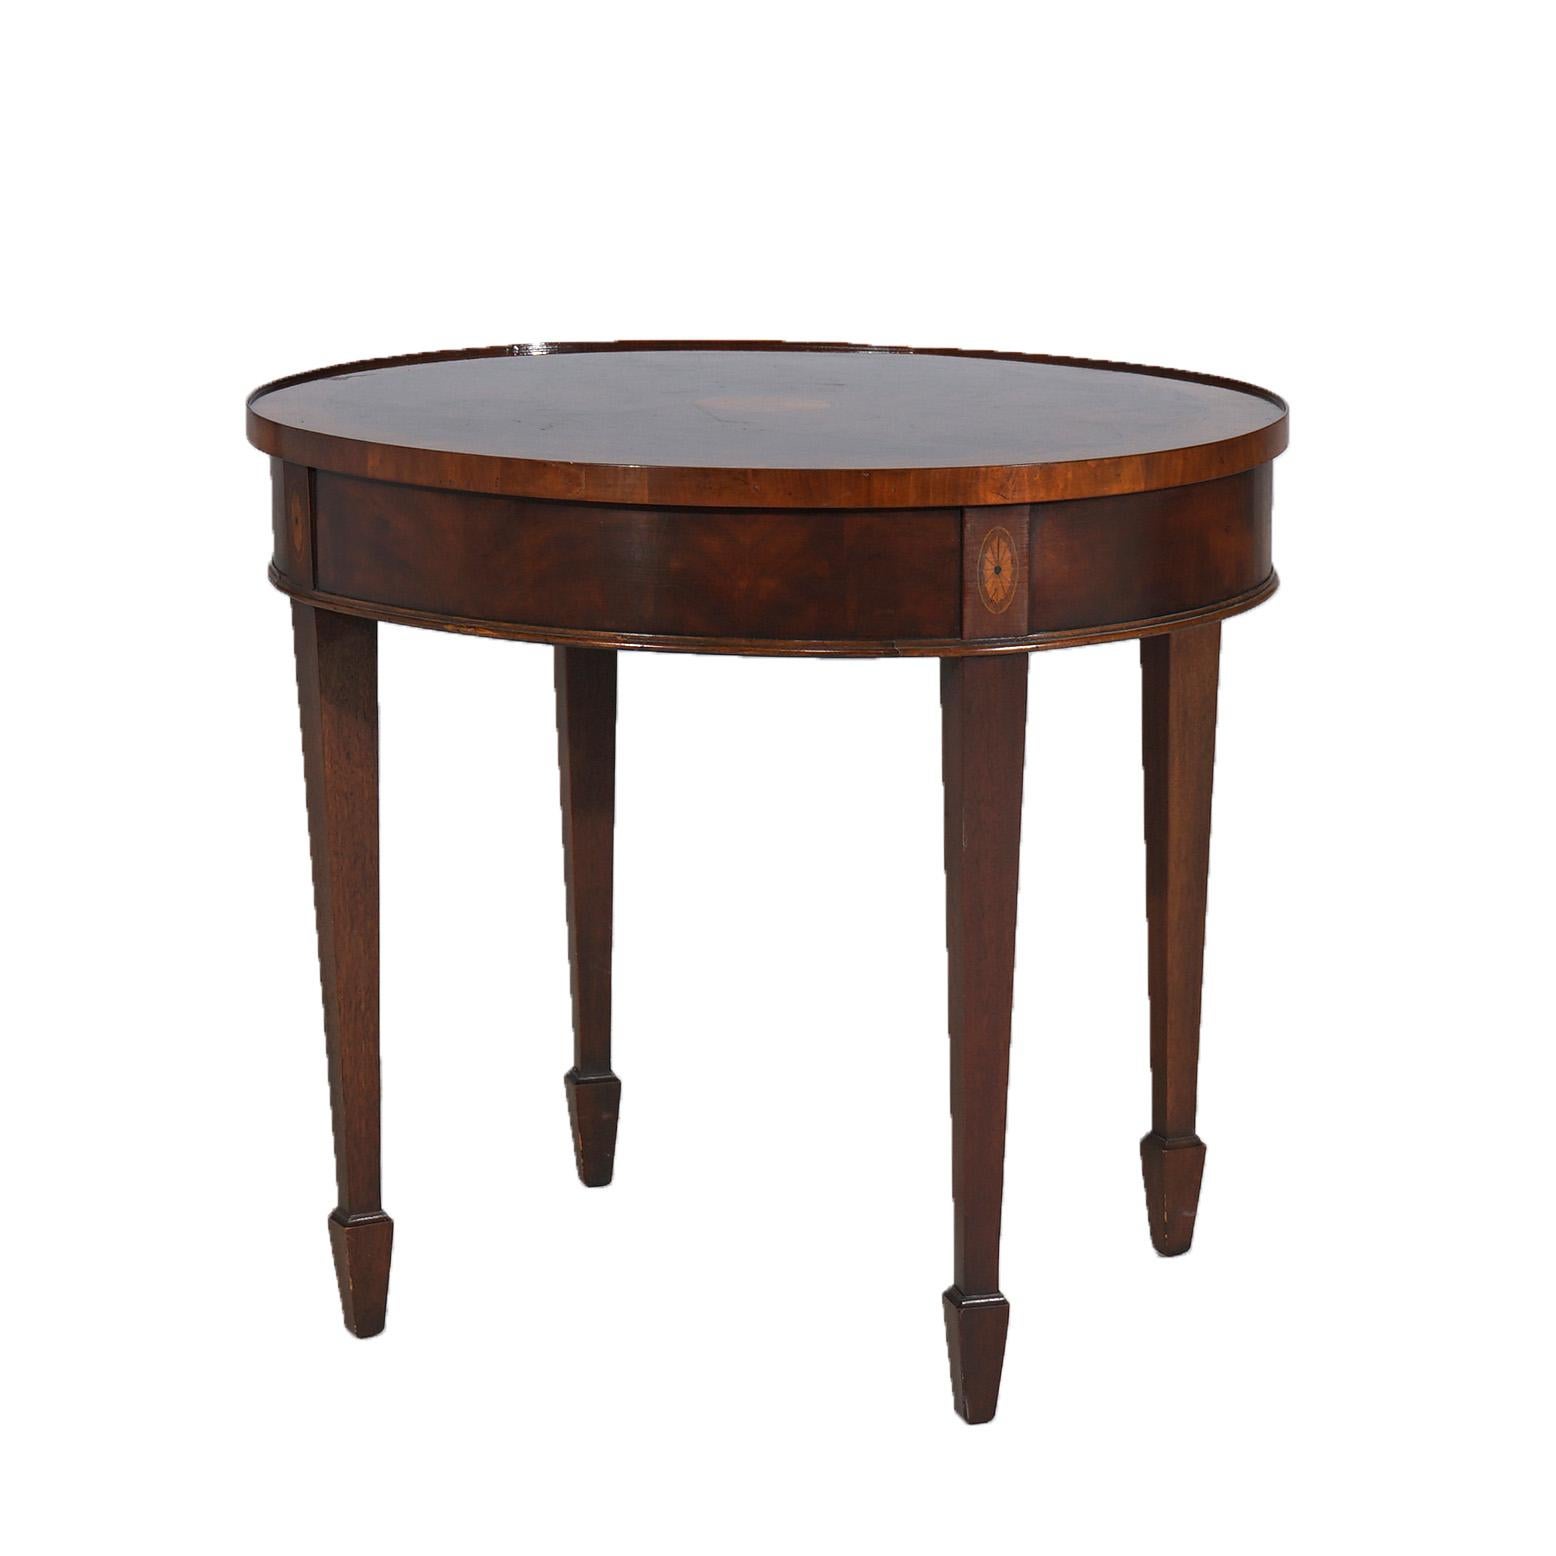 Hekman Copley Style Flame Mahogany & Satinwood Inlaid Side Table C1930 For Sale 5